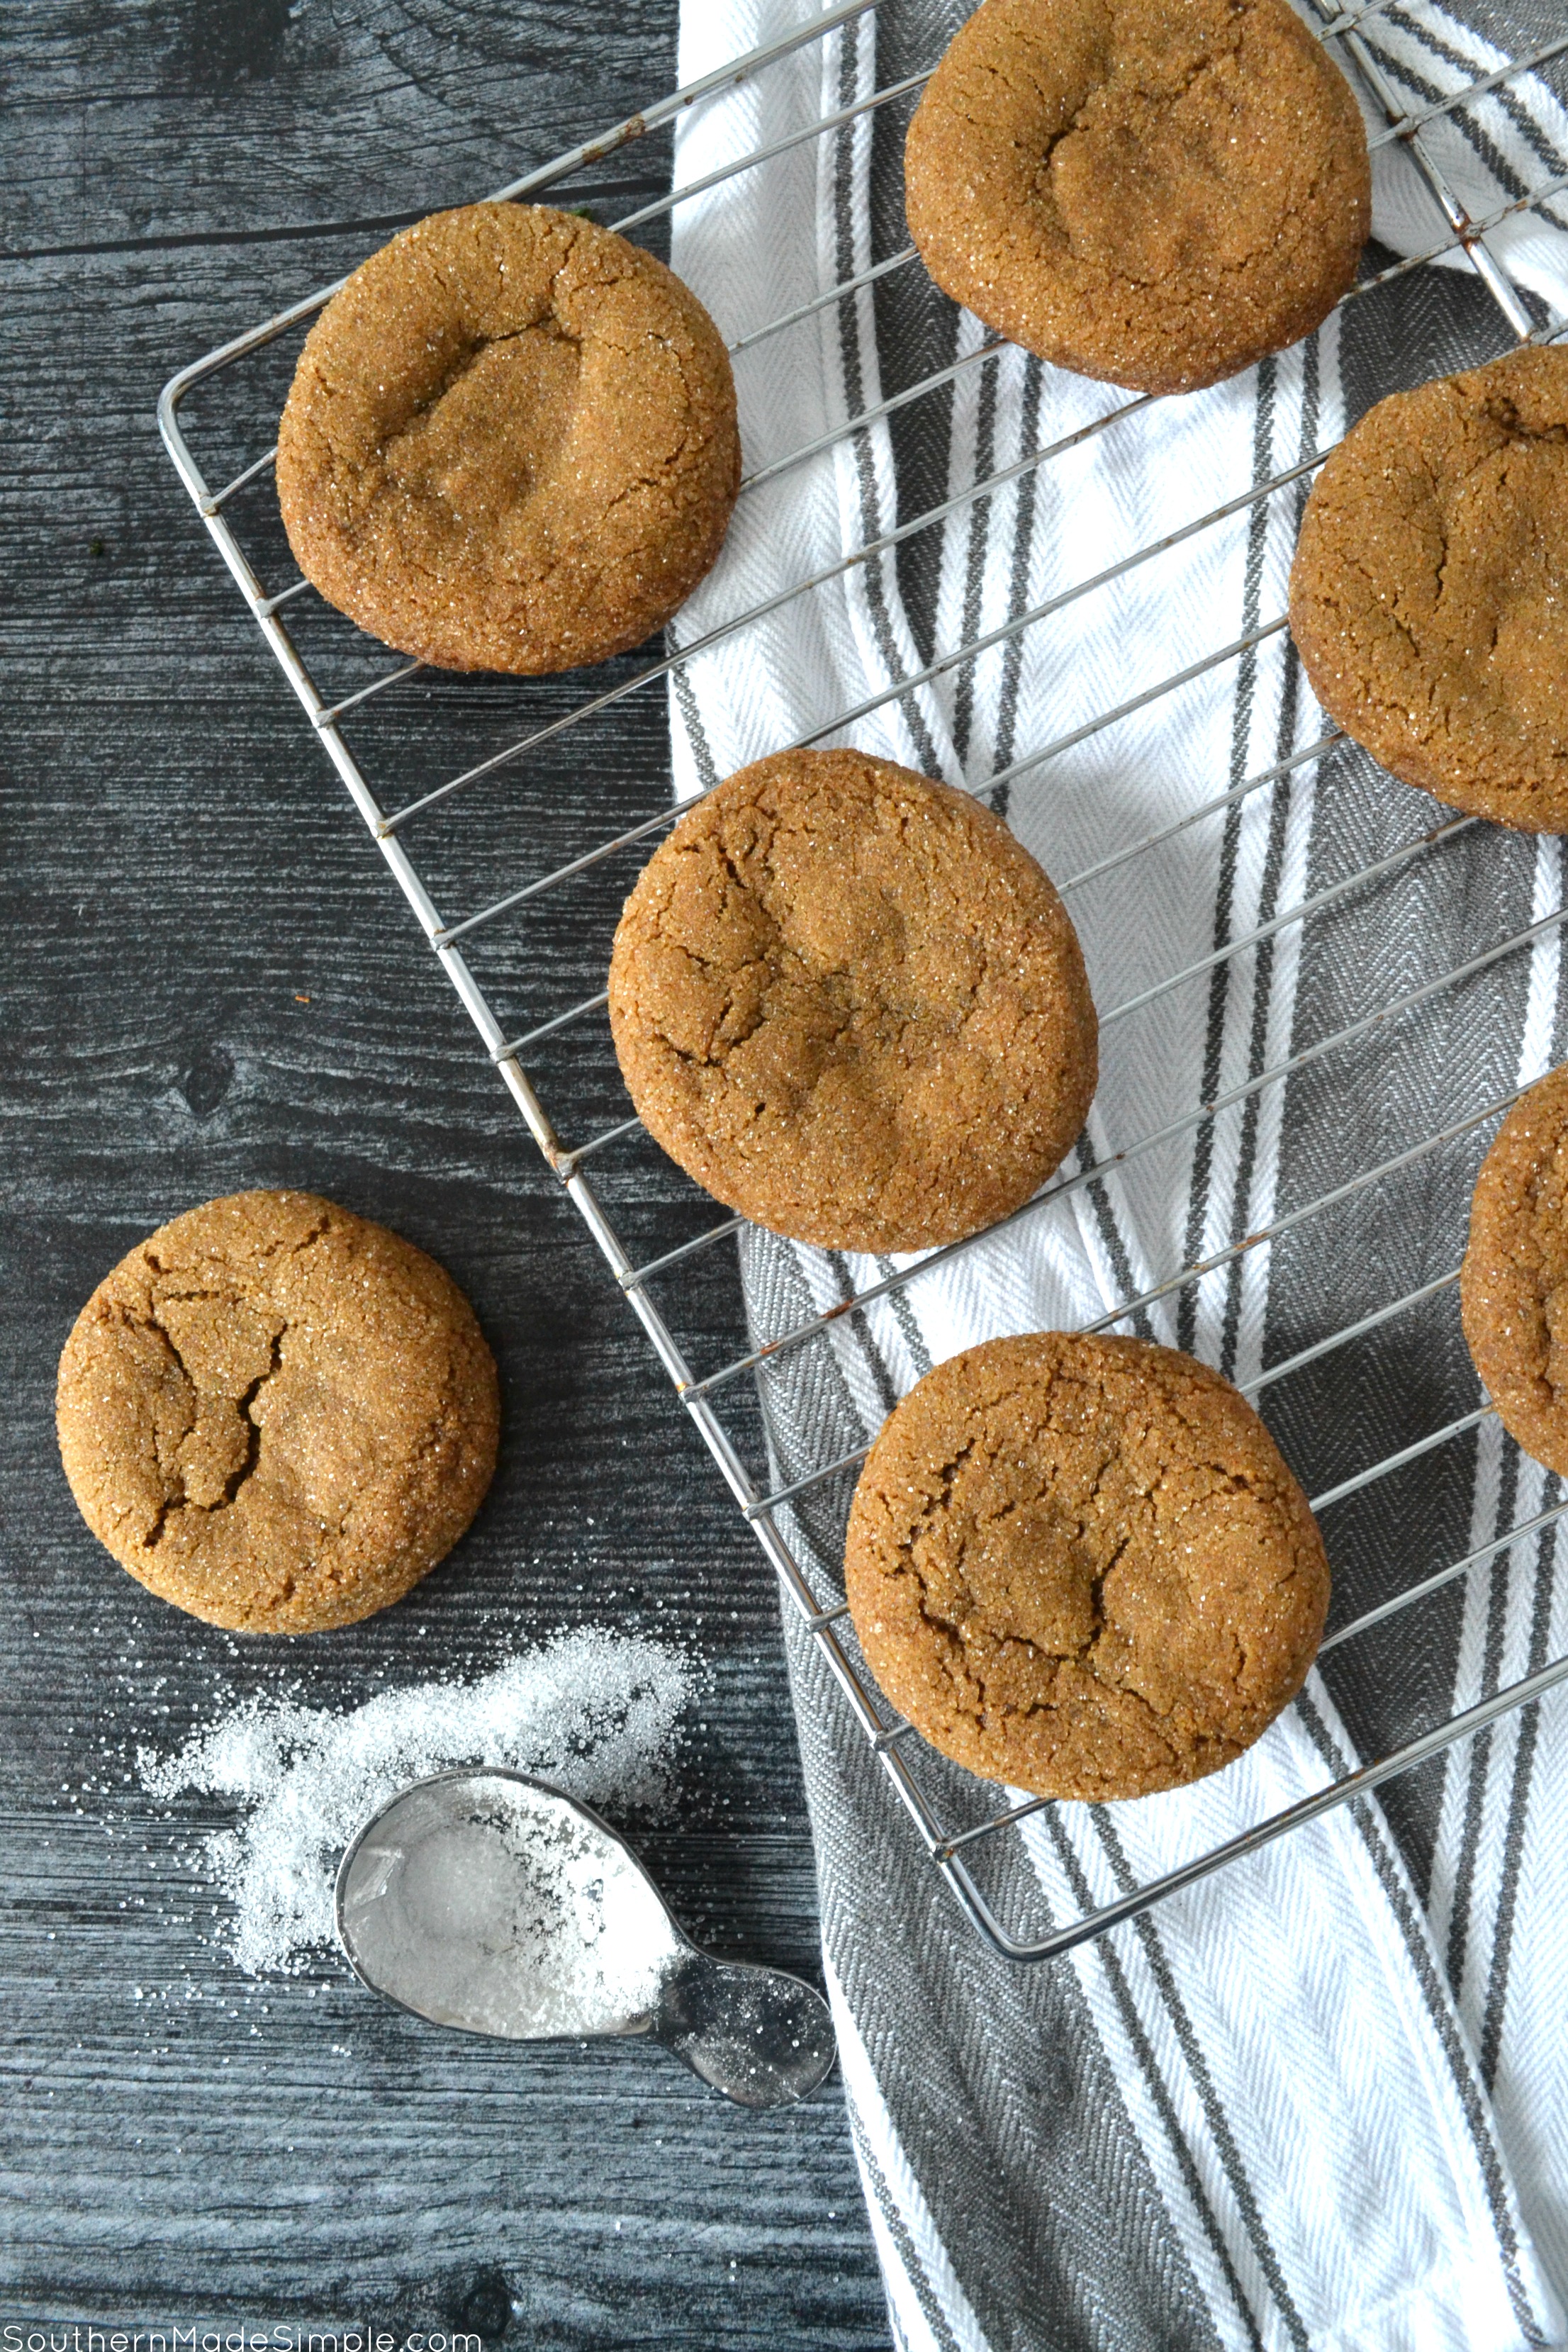 These Molasses Sugar Cookies are crisp on the outside, chewy on the inside and coated in sweet sugar crystals. They make the whole house smell like christmas when they're in the oven, and you definitely can't eat just one! #molassescookies